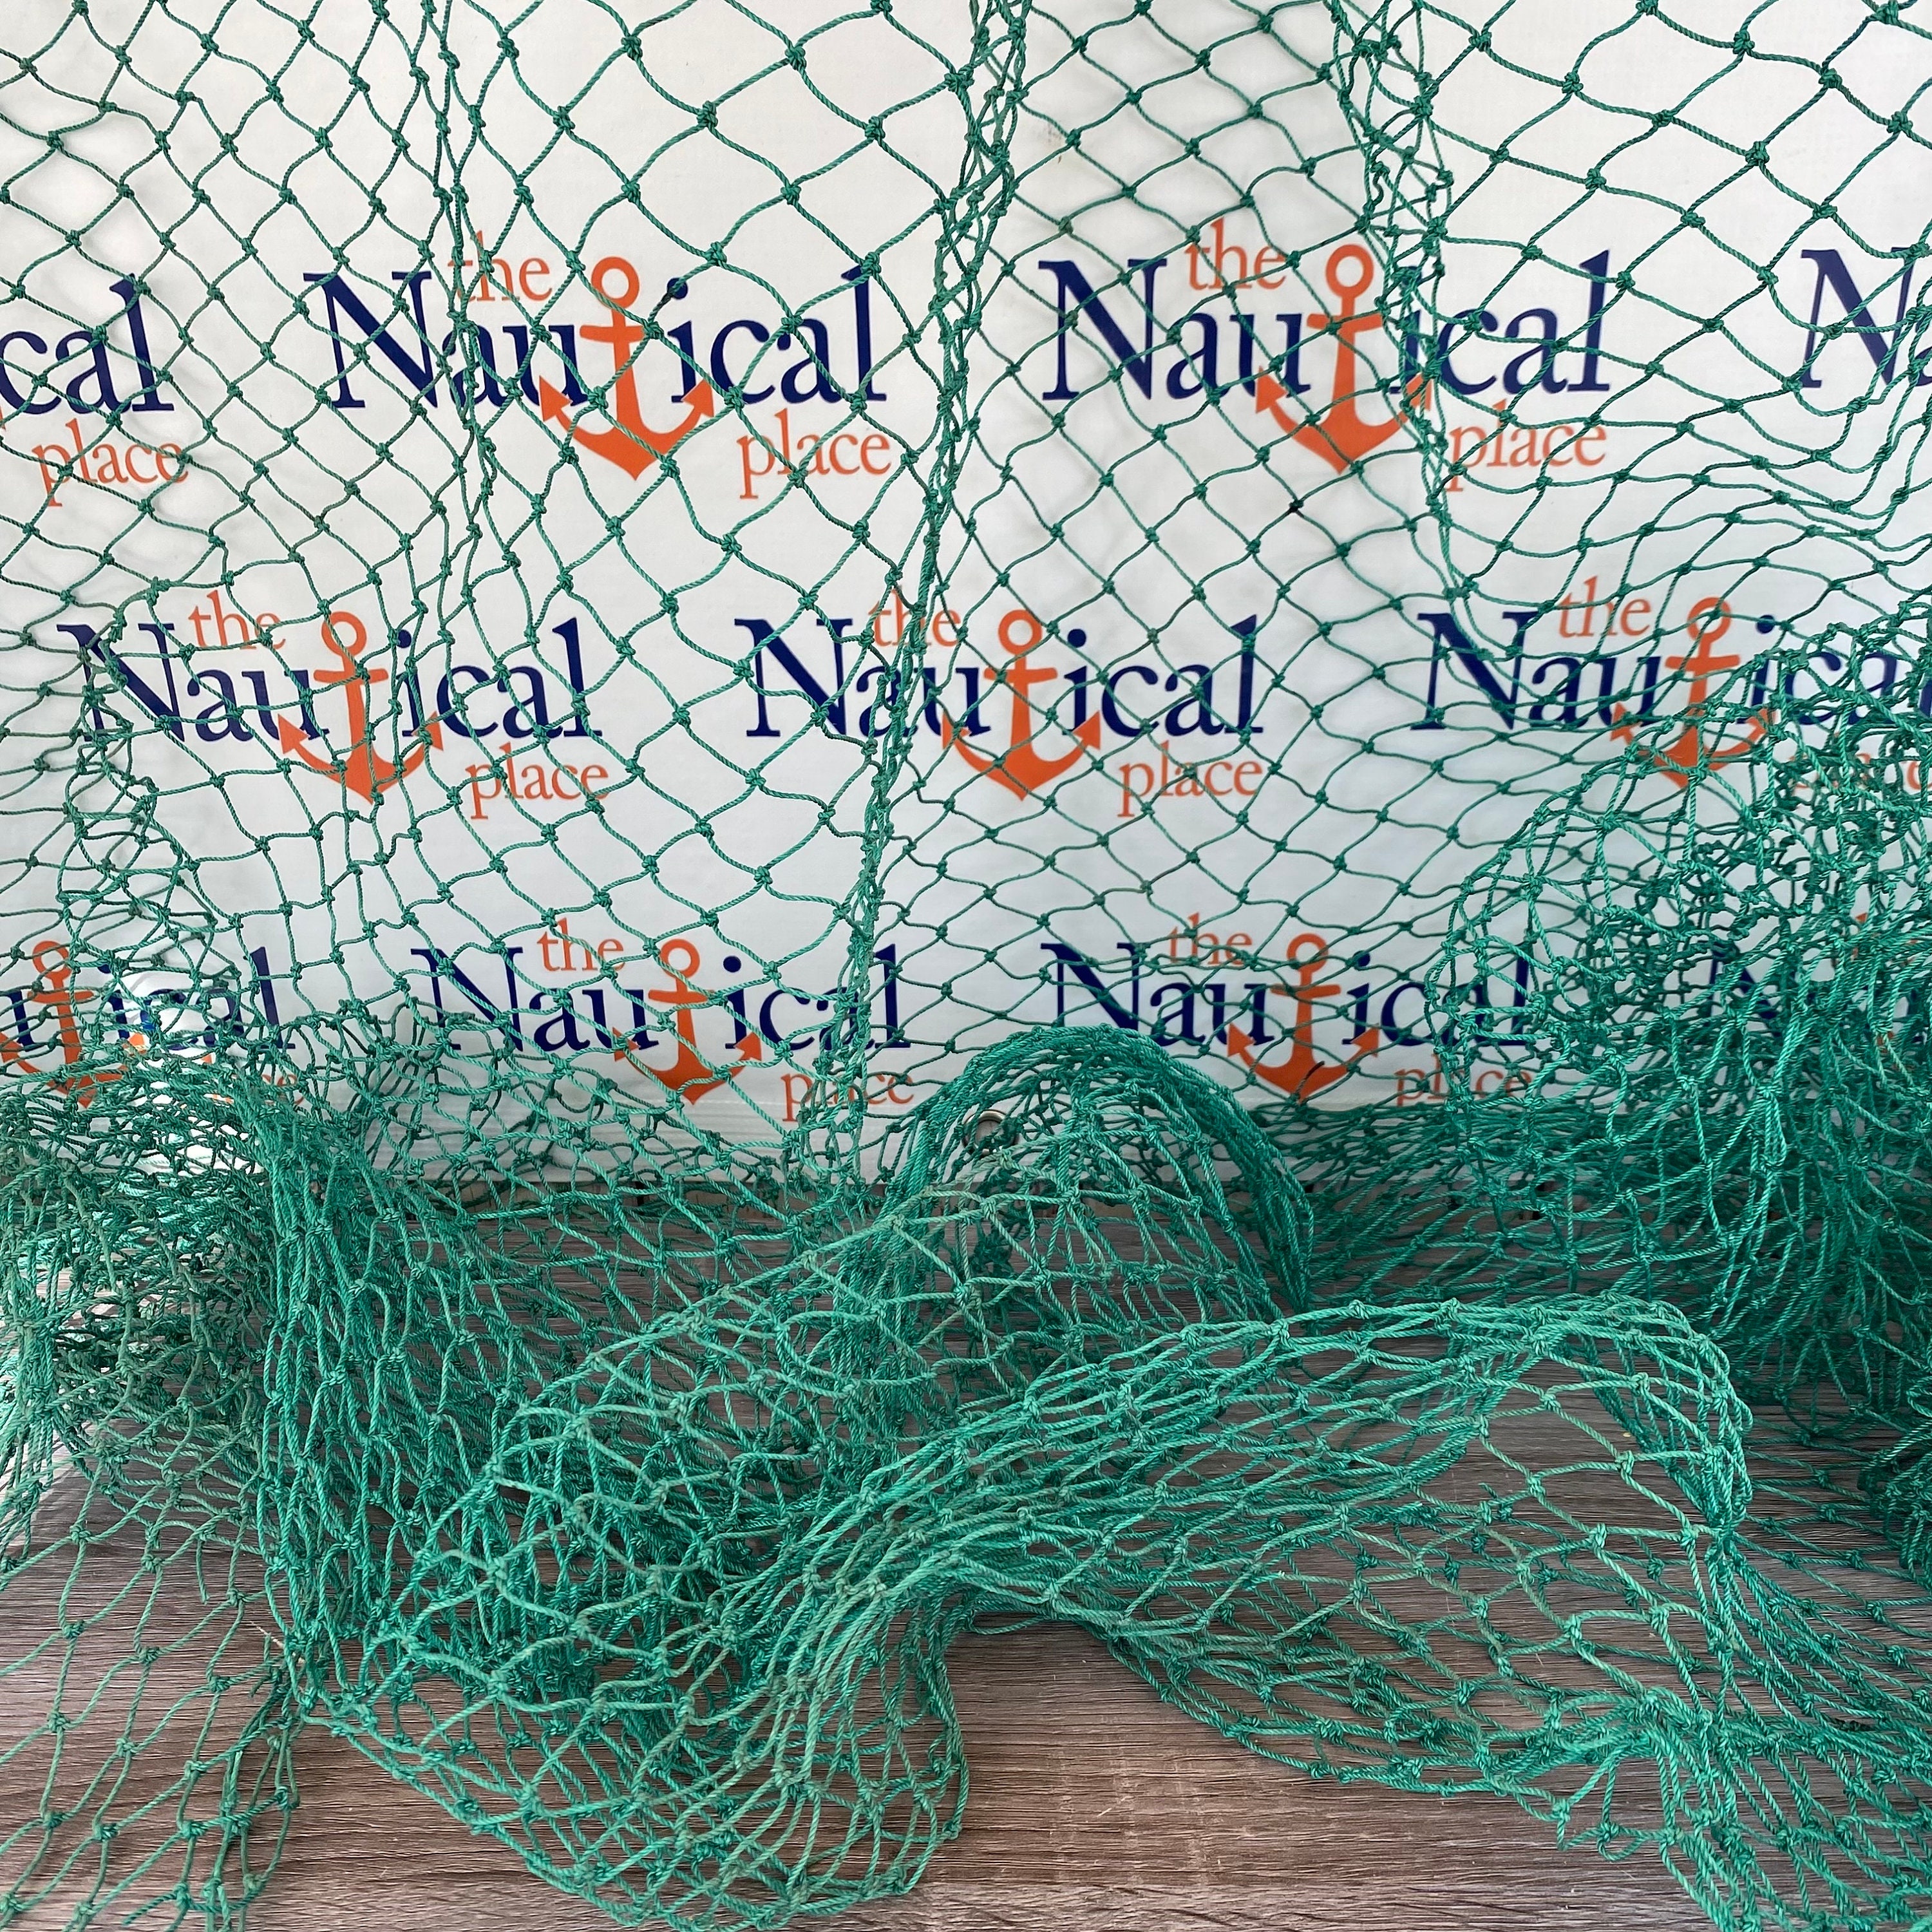 Decorative Green Fish Net 5 Ft X 8 Ft Knotted New Commercial Fish Netting  Nautical Decor Backdrop Photo Shoot 